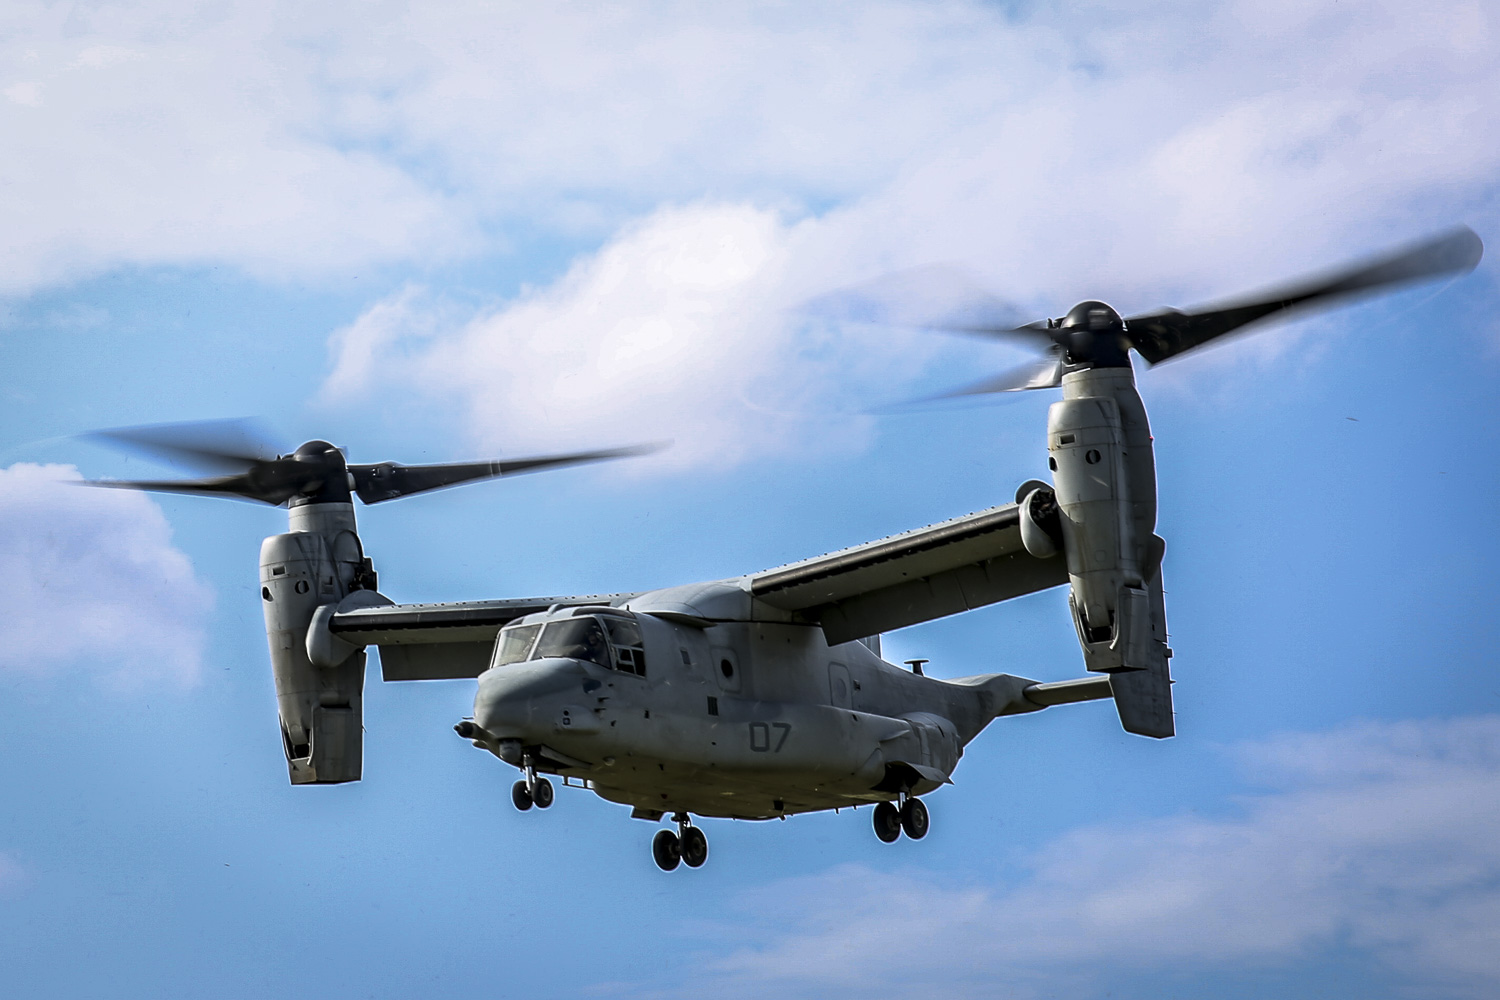 A Marine Corps MV-22B Osprey takes flight after a static display presented by Marines of the 31st Marine Expeditionary Unit to South Korean marines and sailors at Camp Hansen, Okinawa, Japan, Nov. 30, 2016. An Osprey with five crew members aboard landed in shallow water off the coast of Okinawa, Dec.12, 2016. All five were rescued. Marine Corps photo by Lance Cpl. Jorge A. Rosales. -